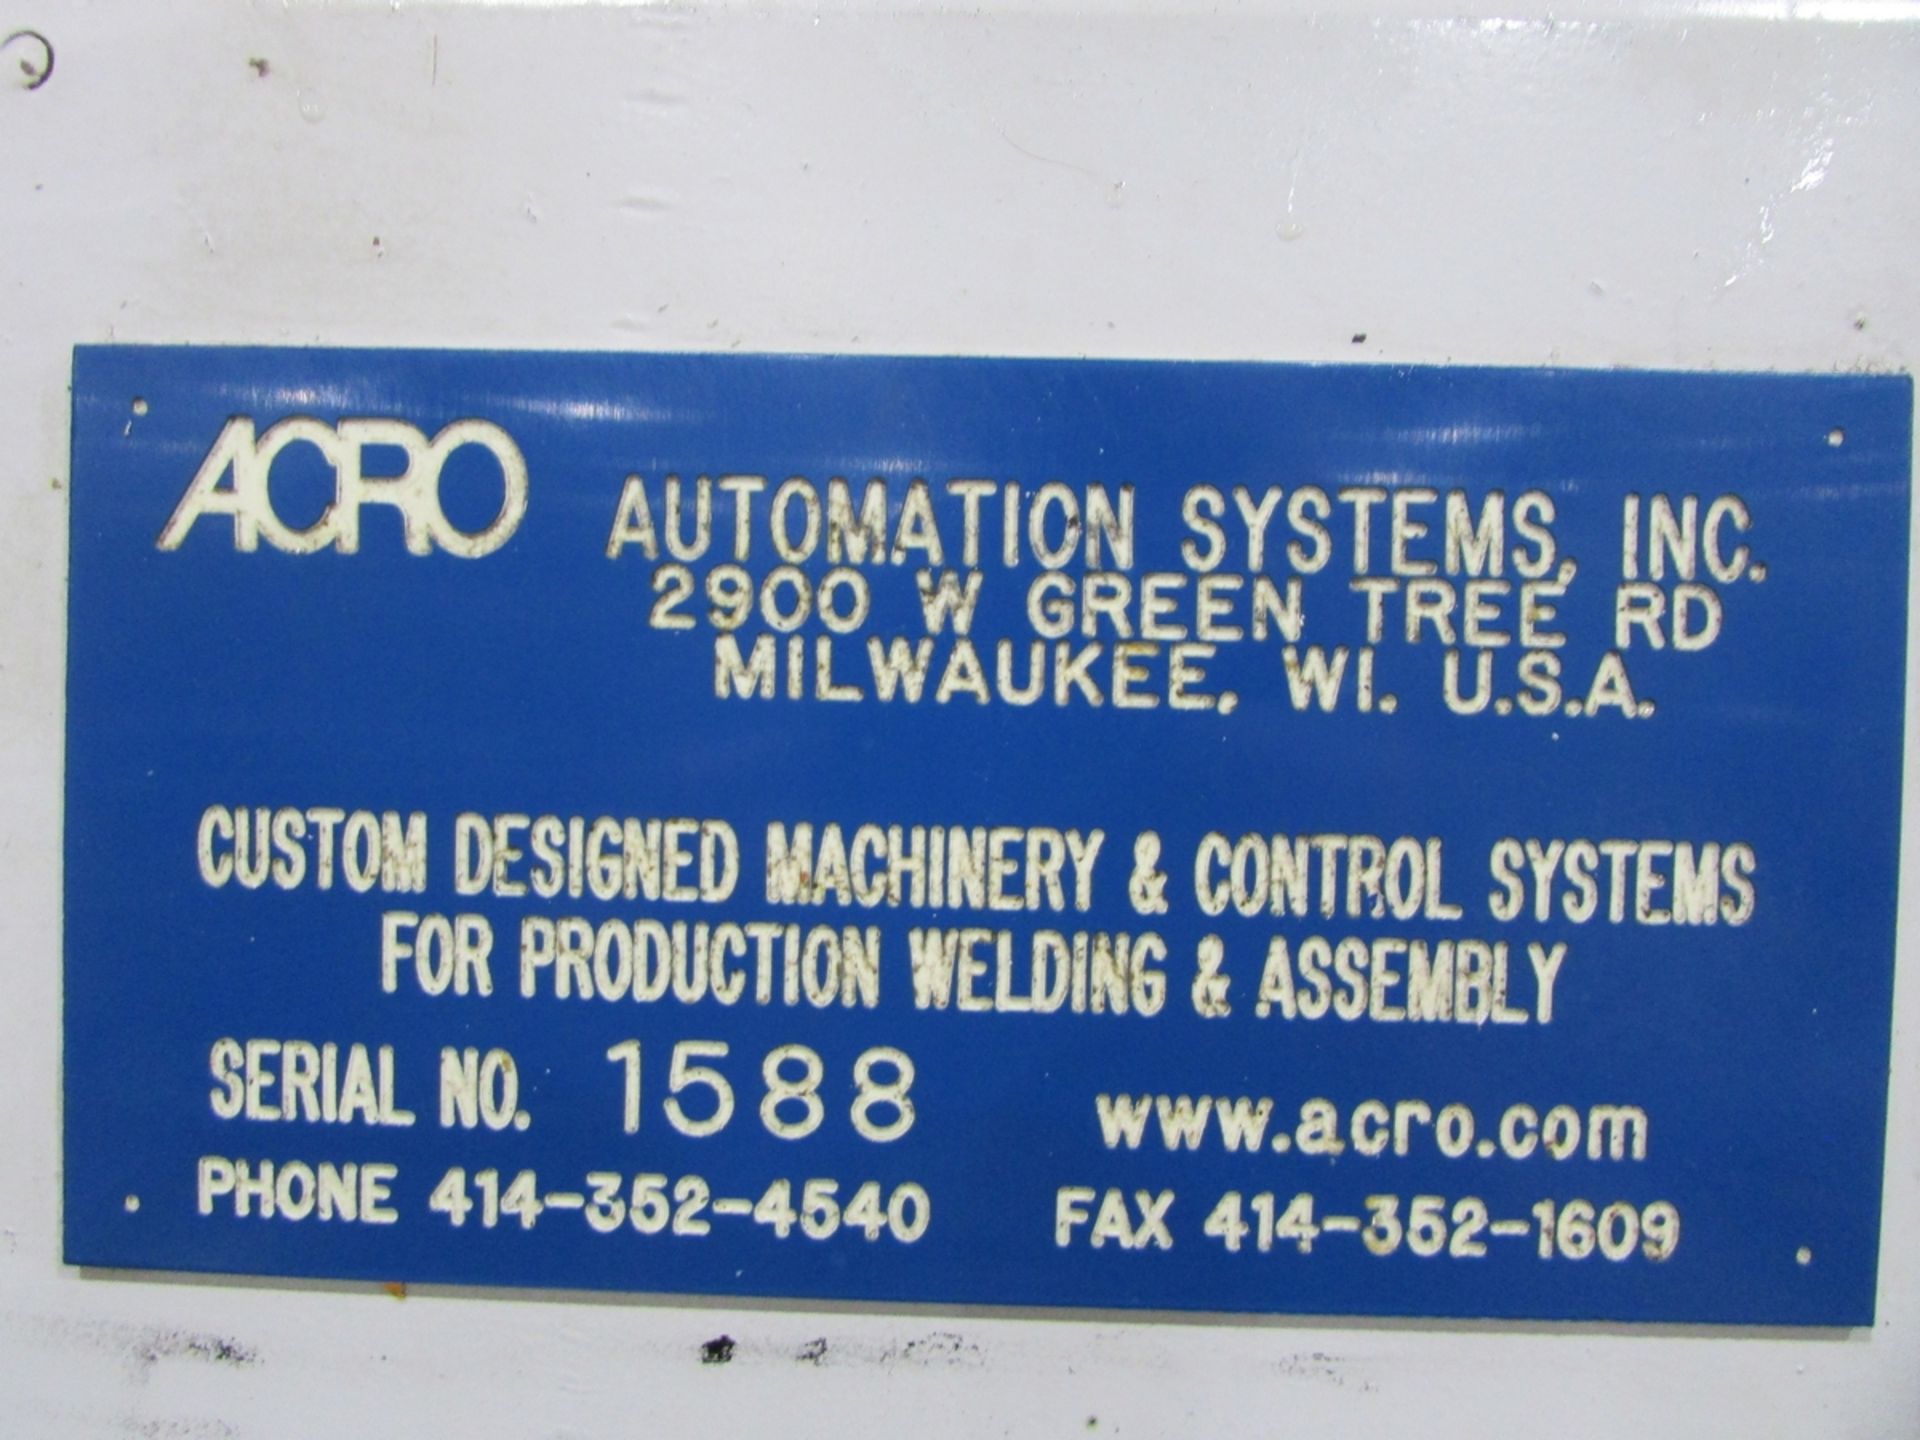 Acro Automation System Fly-Wheel Connecting Rod Assembly Machine - Image 11 of 11